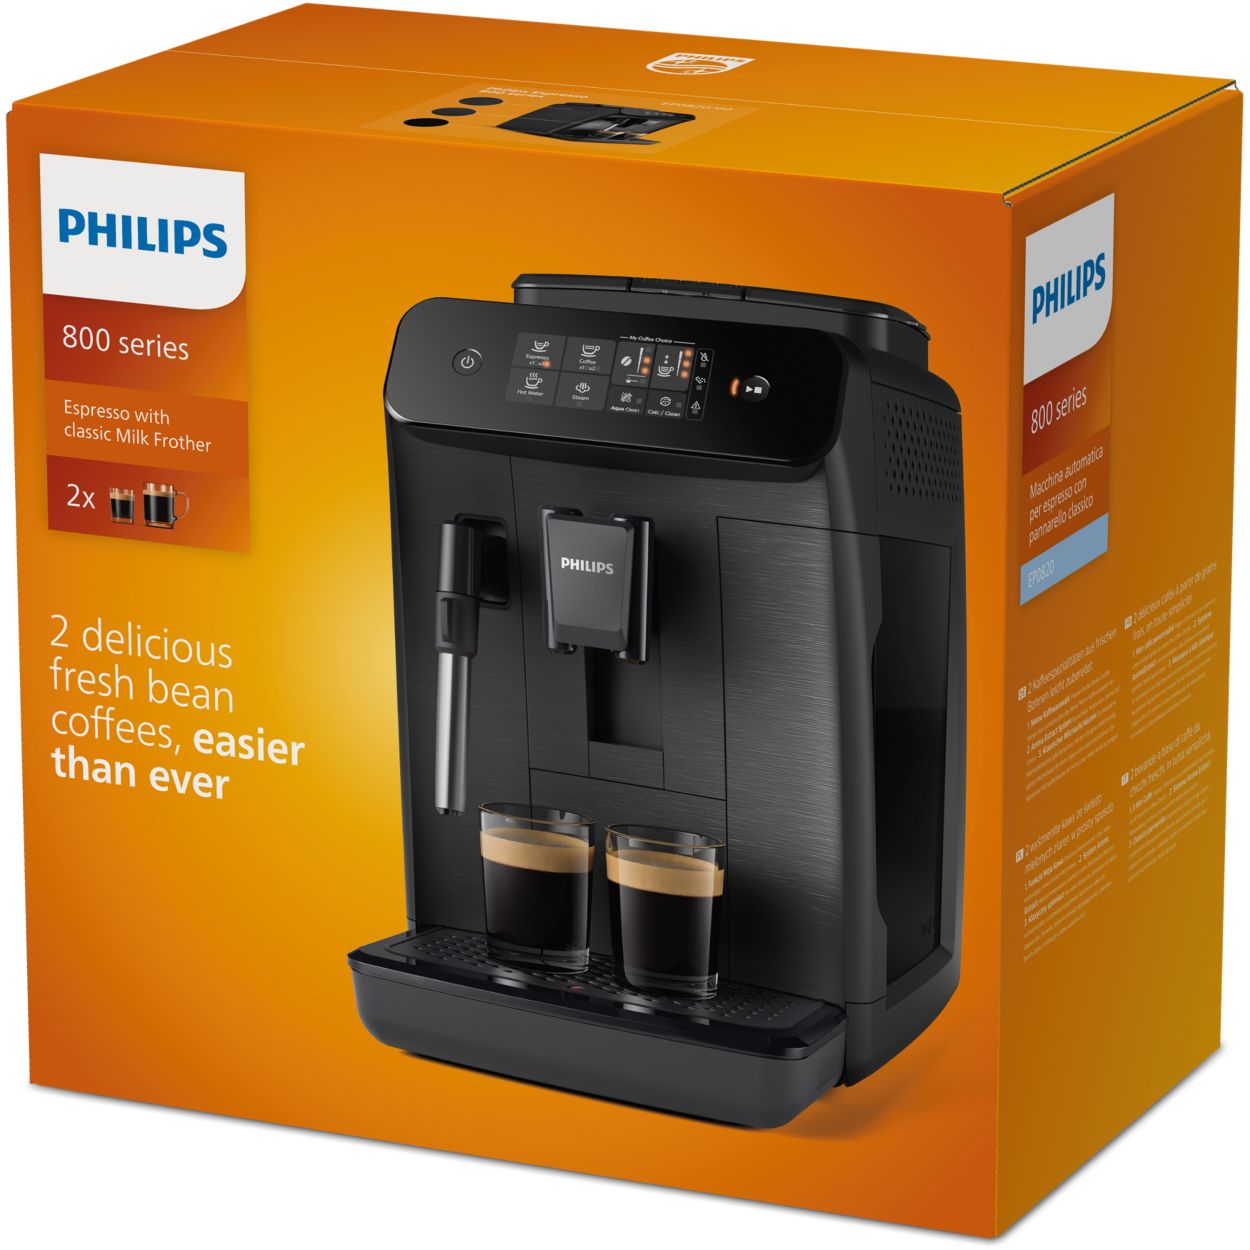 Series 800 Fully EP0820/04 | espresso automatic Philips machines